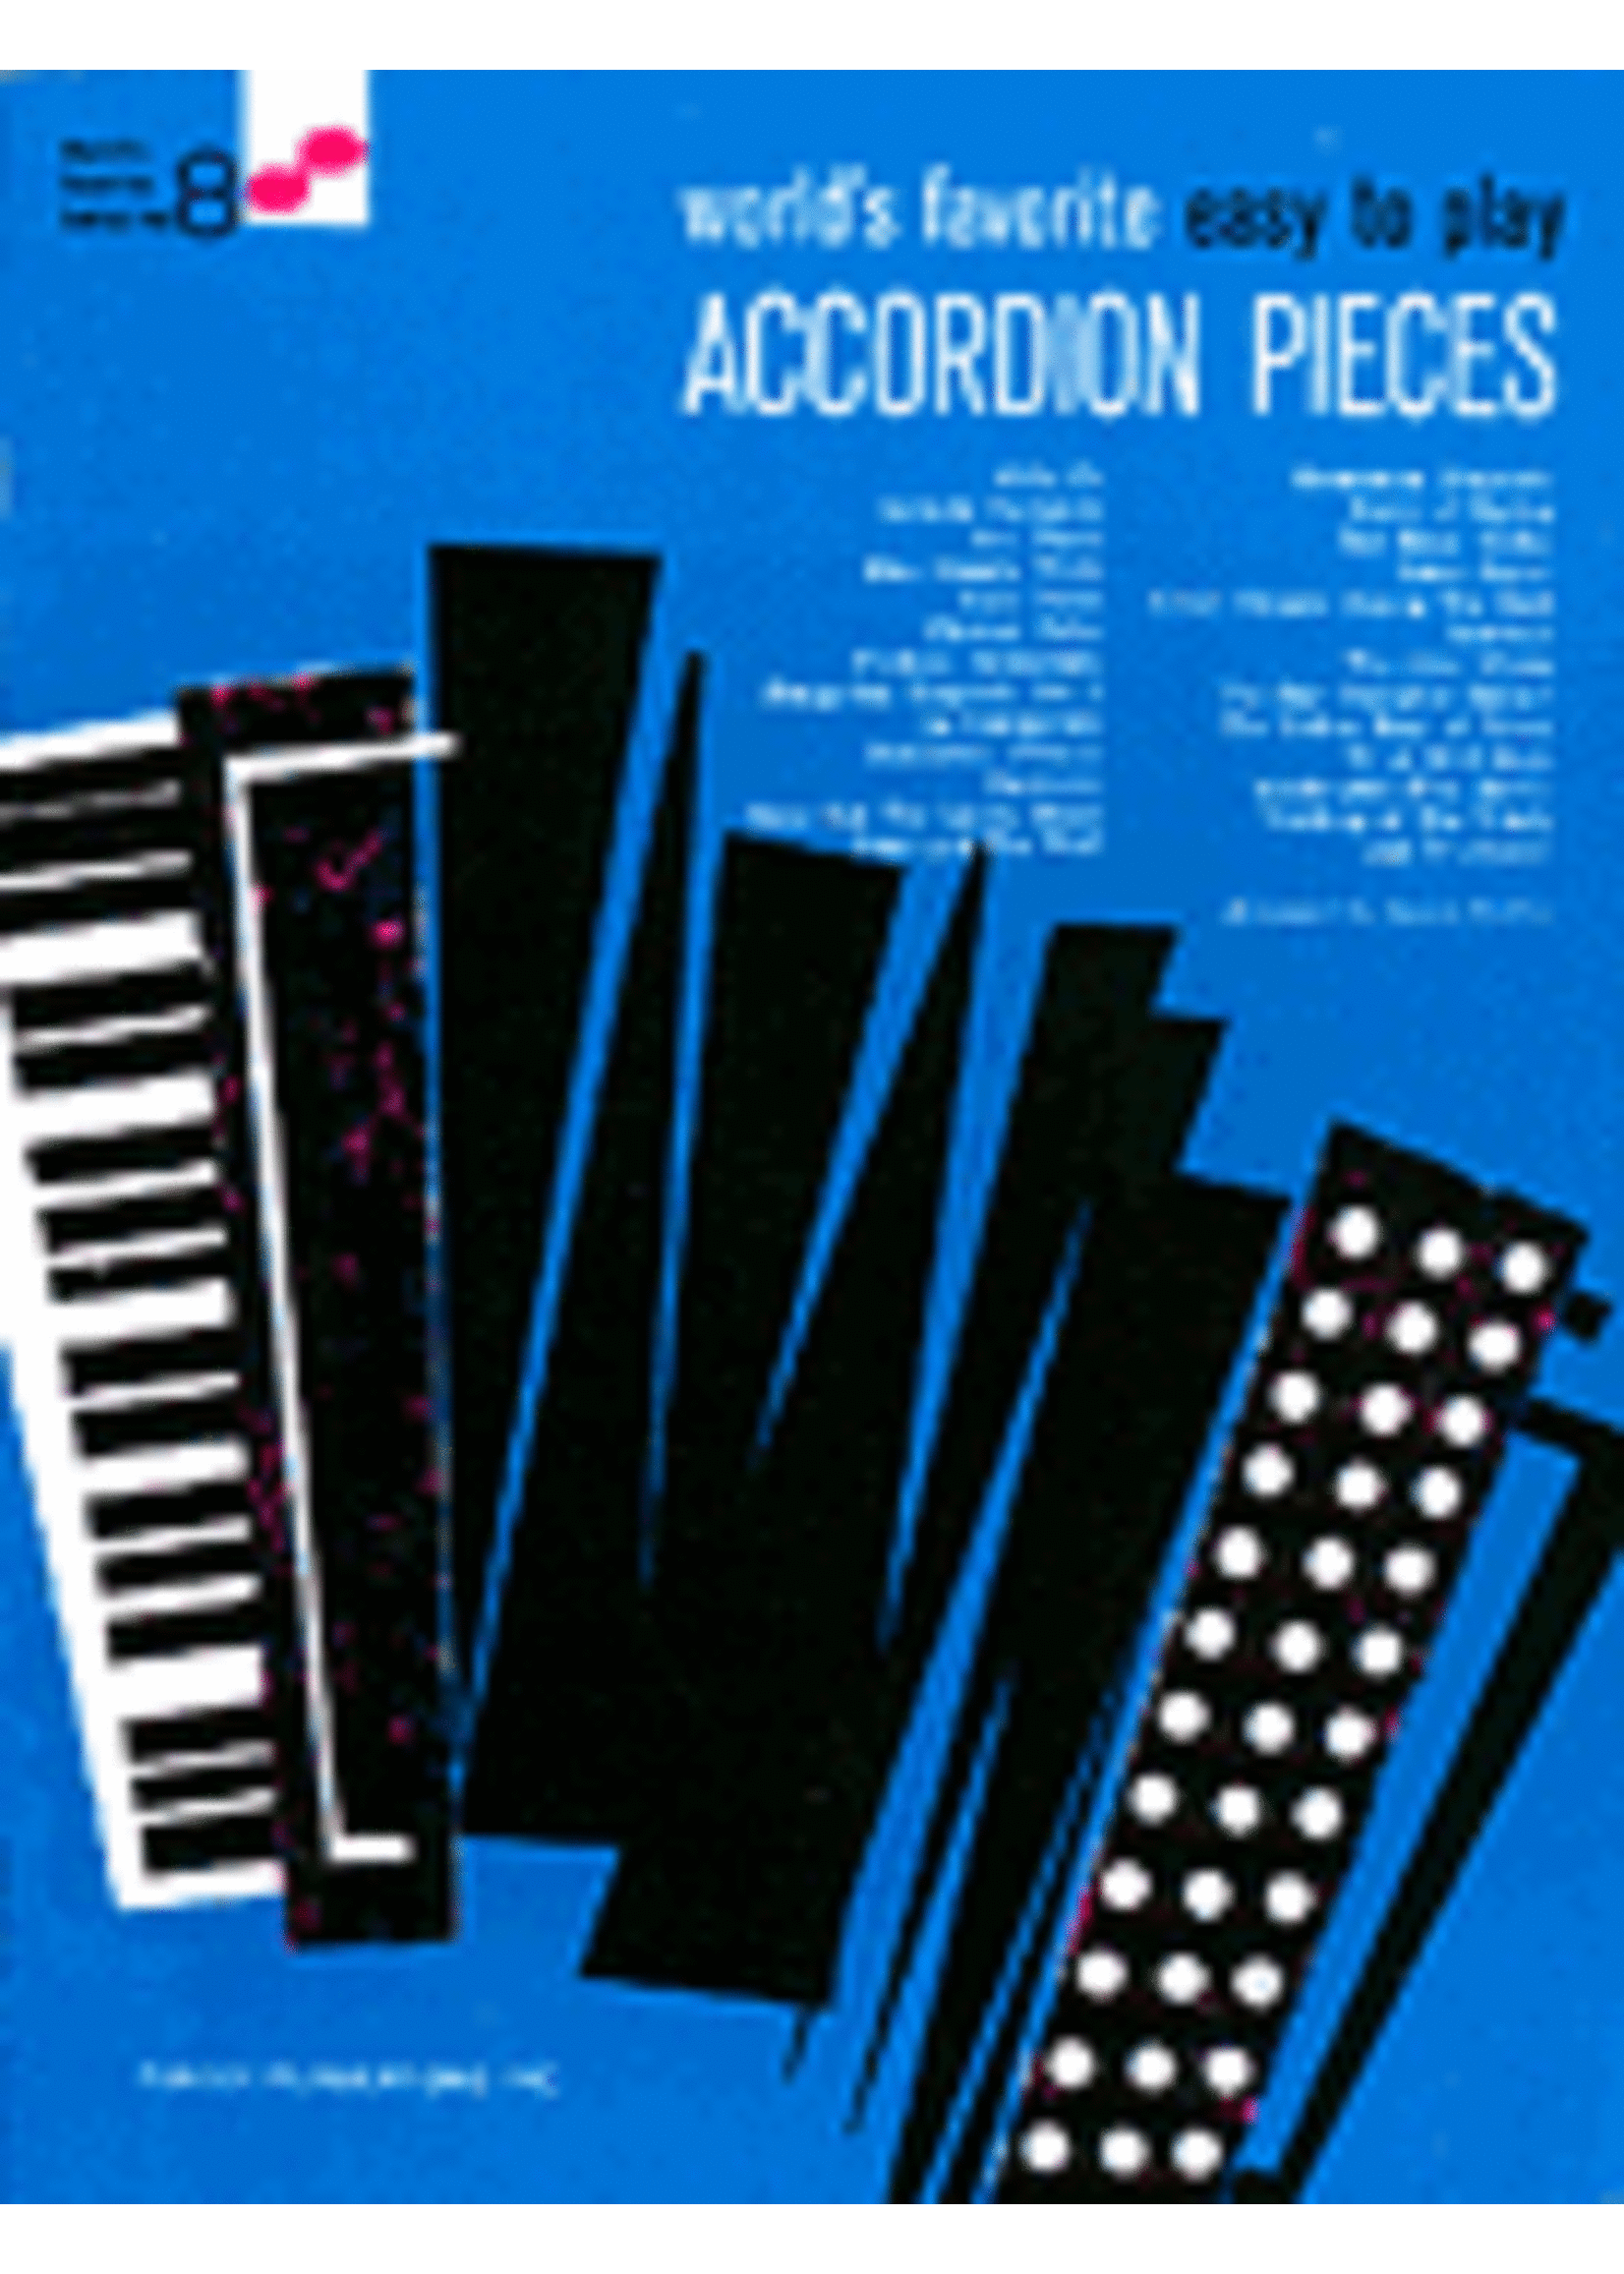 Hal Leonard World's Favourite Easy to Play Accordion Pieces